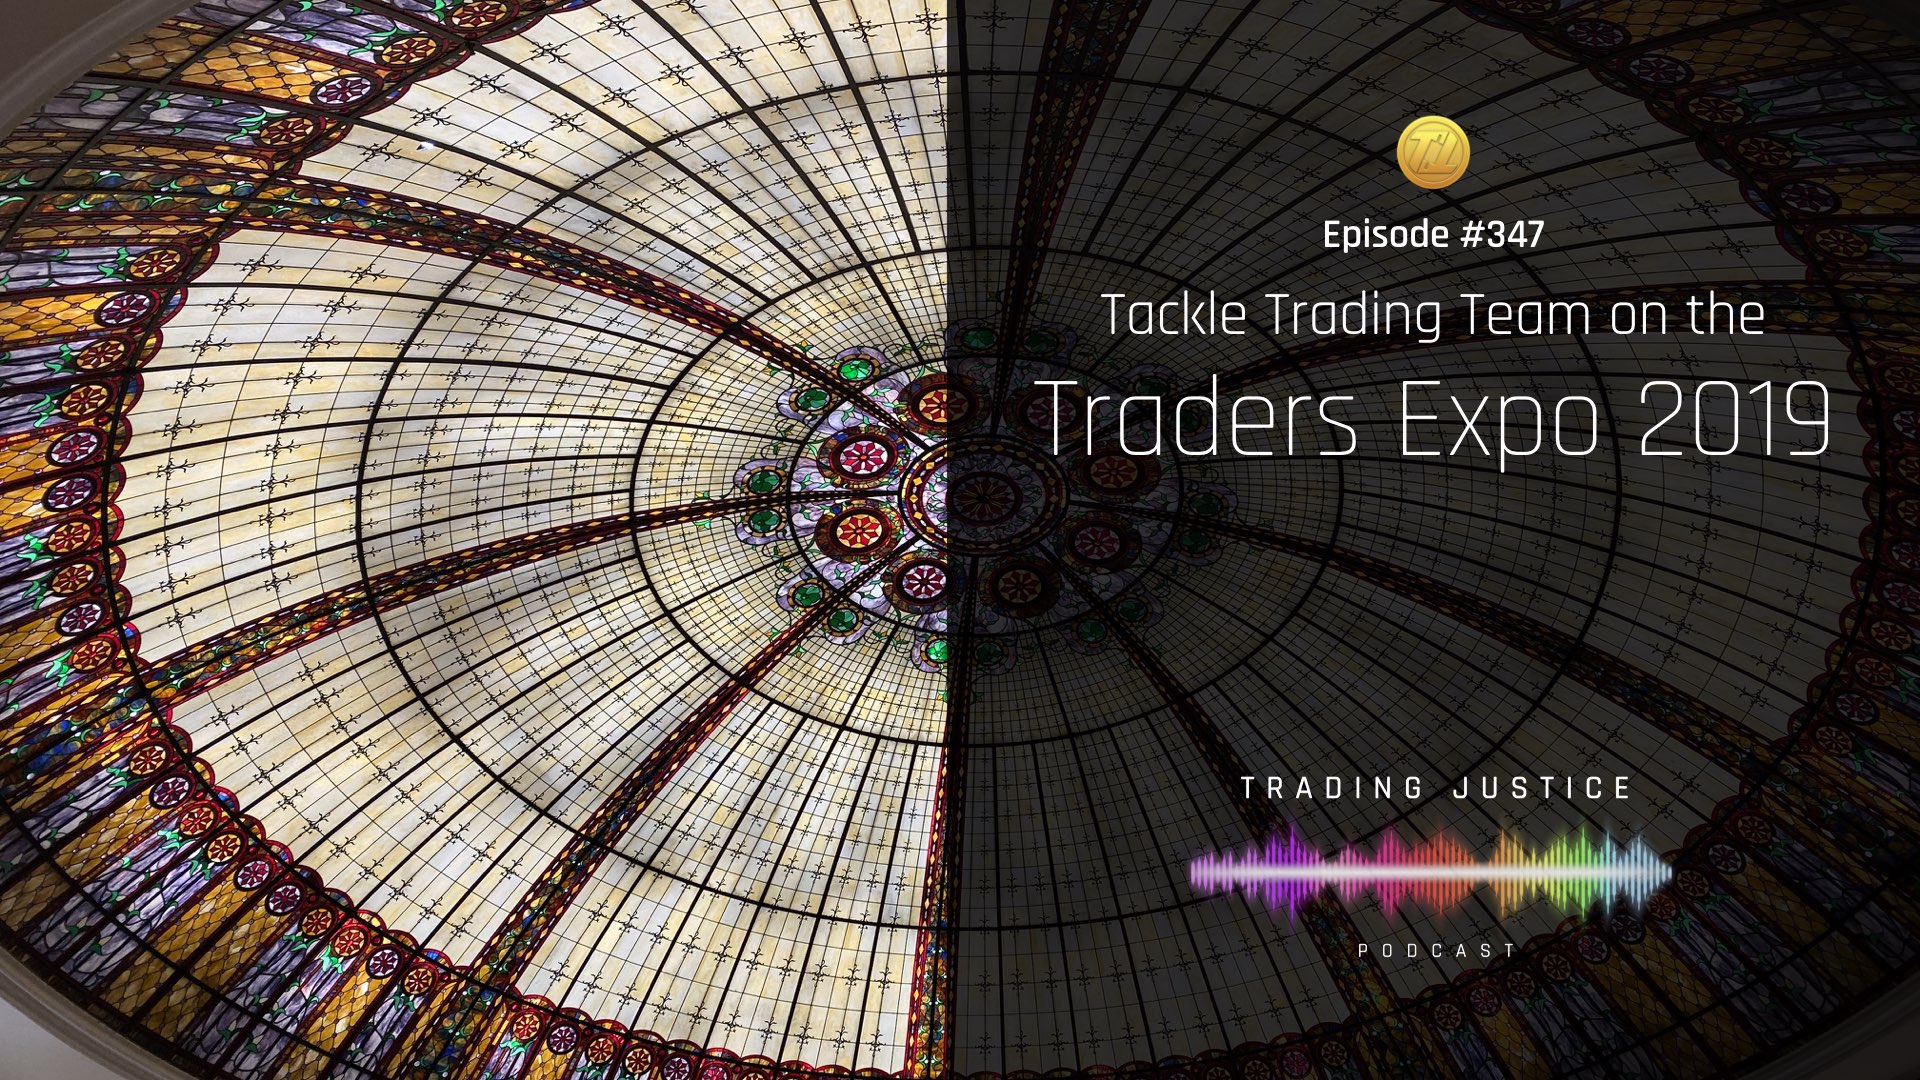 Episode 347: The Traders Expo 2019